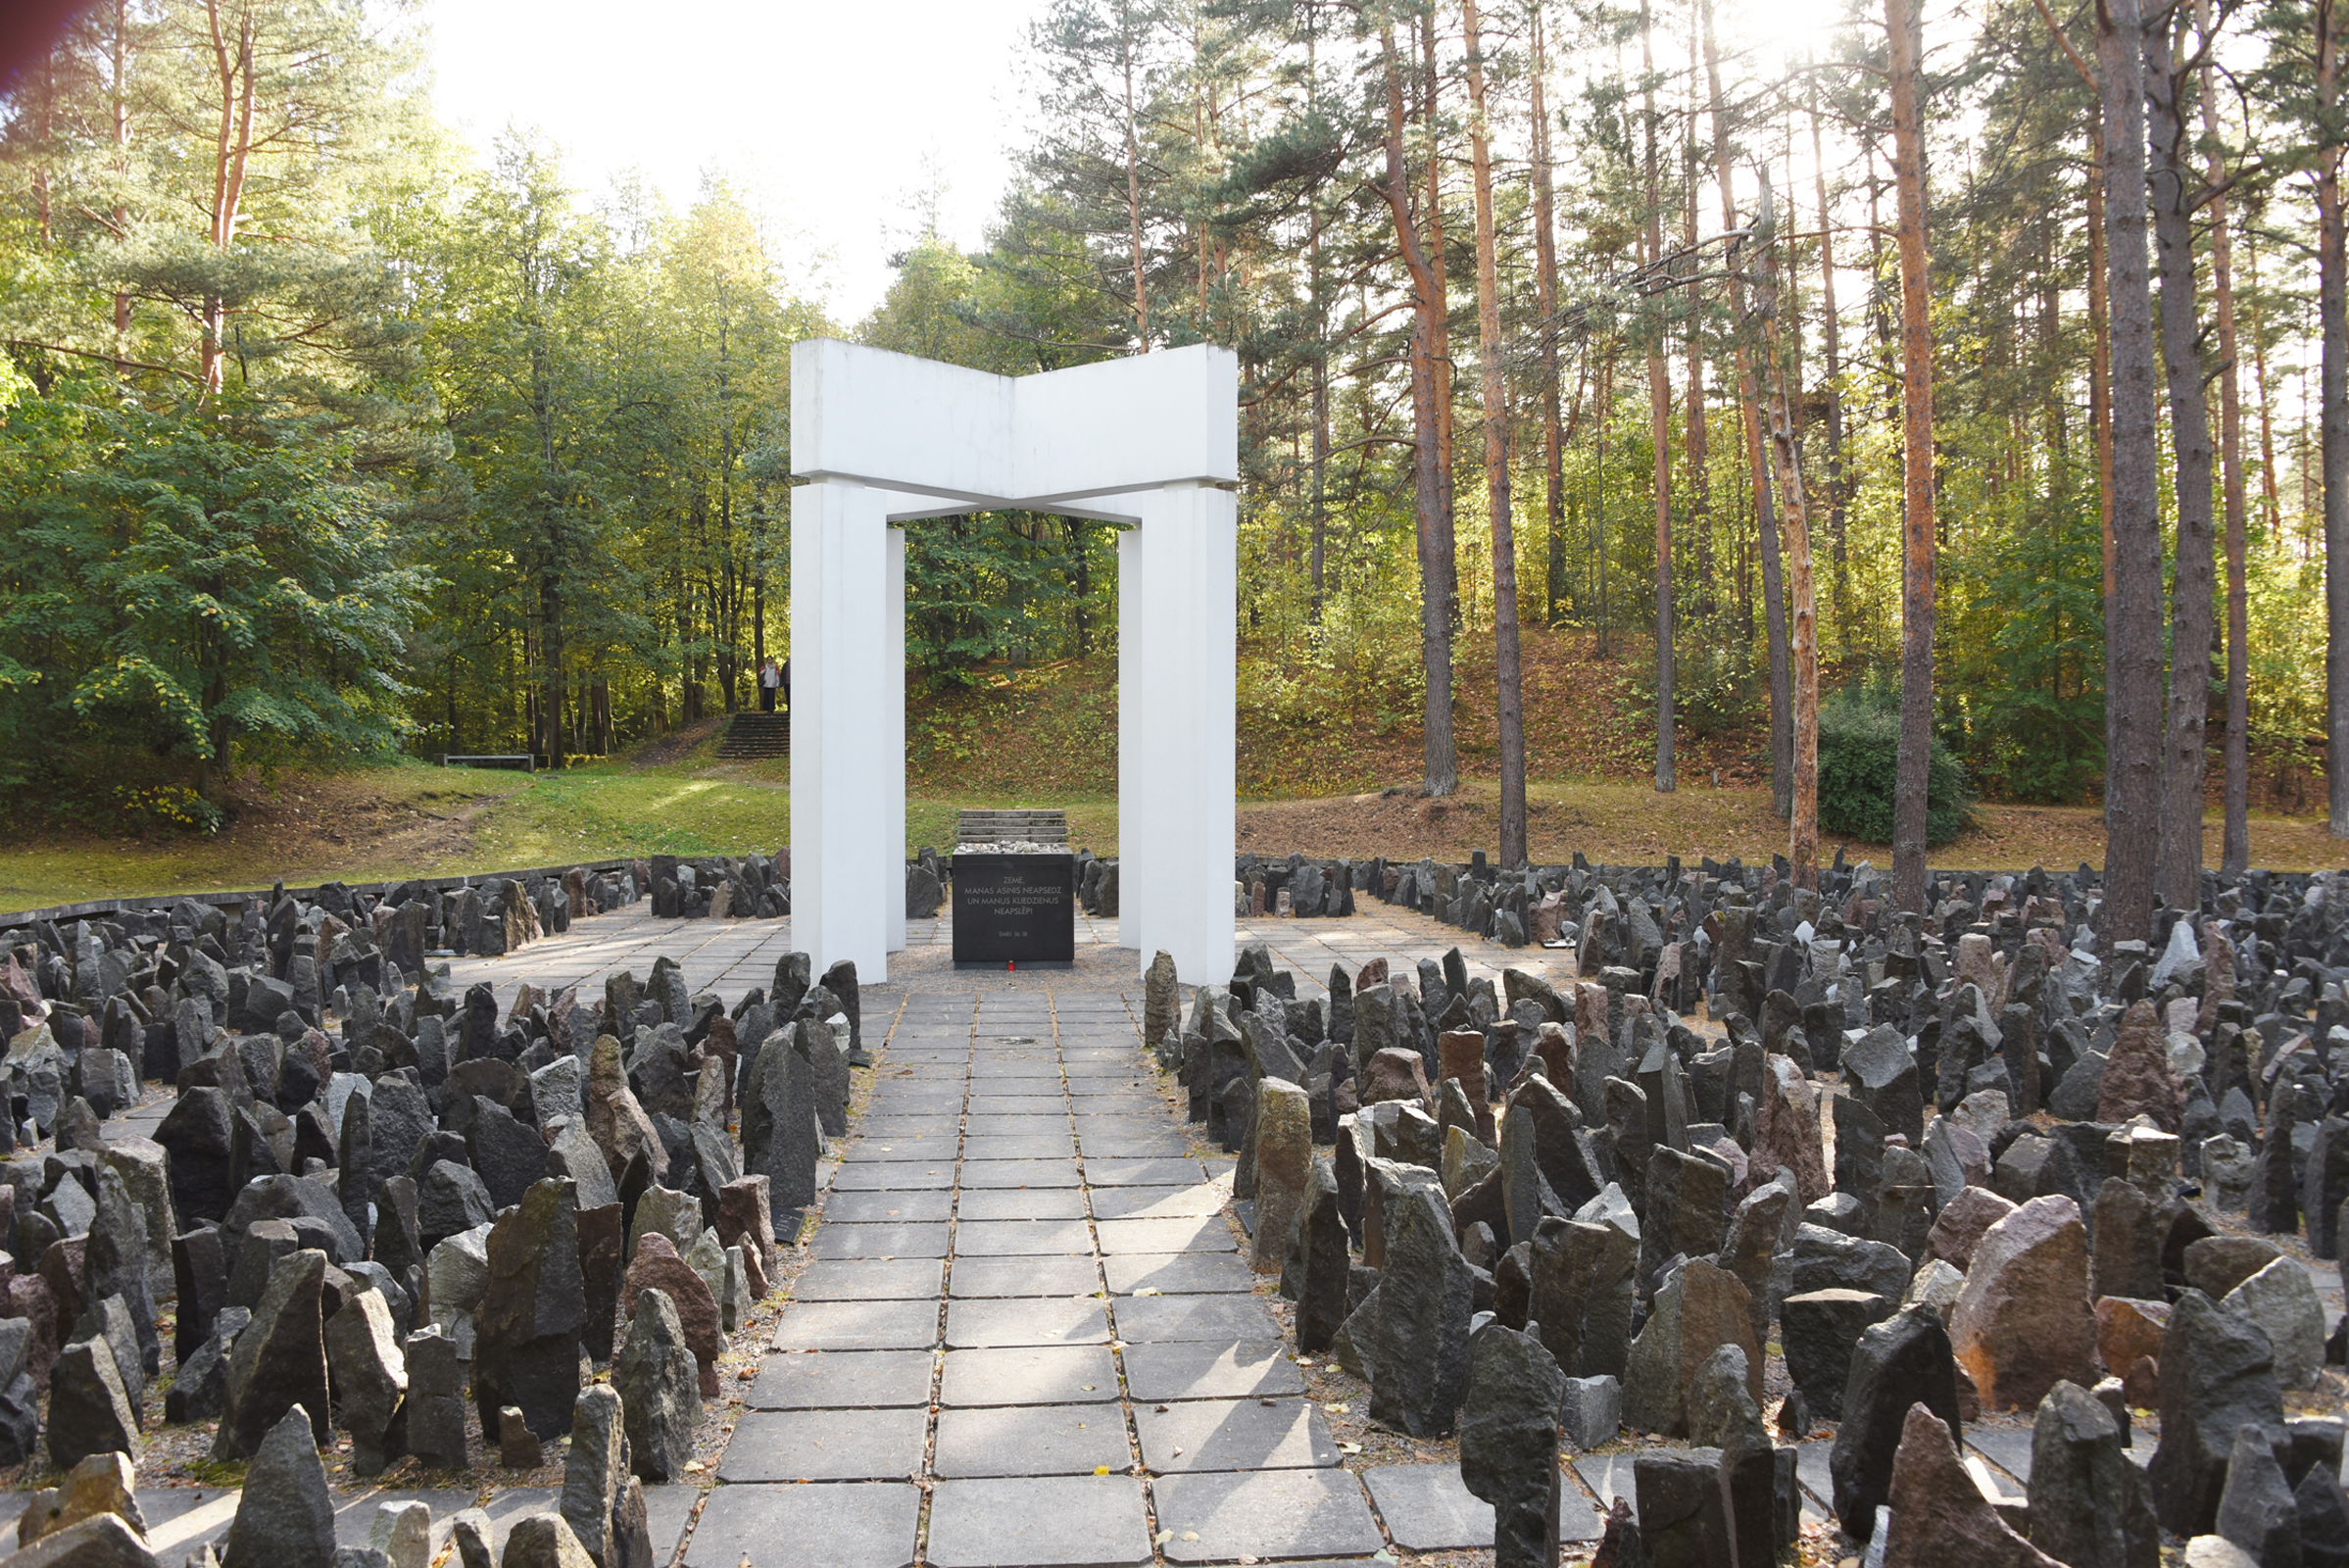 Memorial to the Holocaust victims in the forest of Bikernieki near Riga, Latvia.